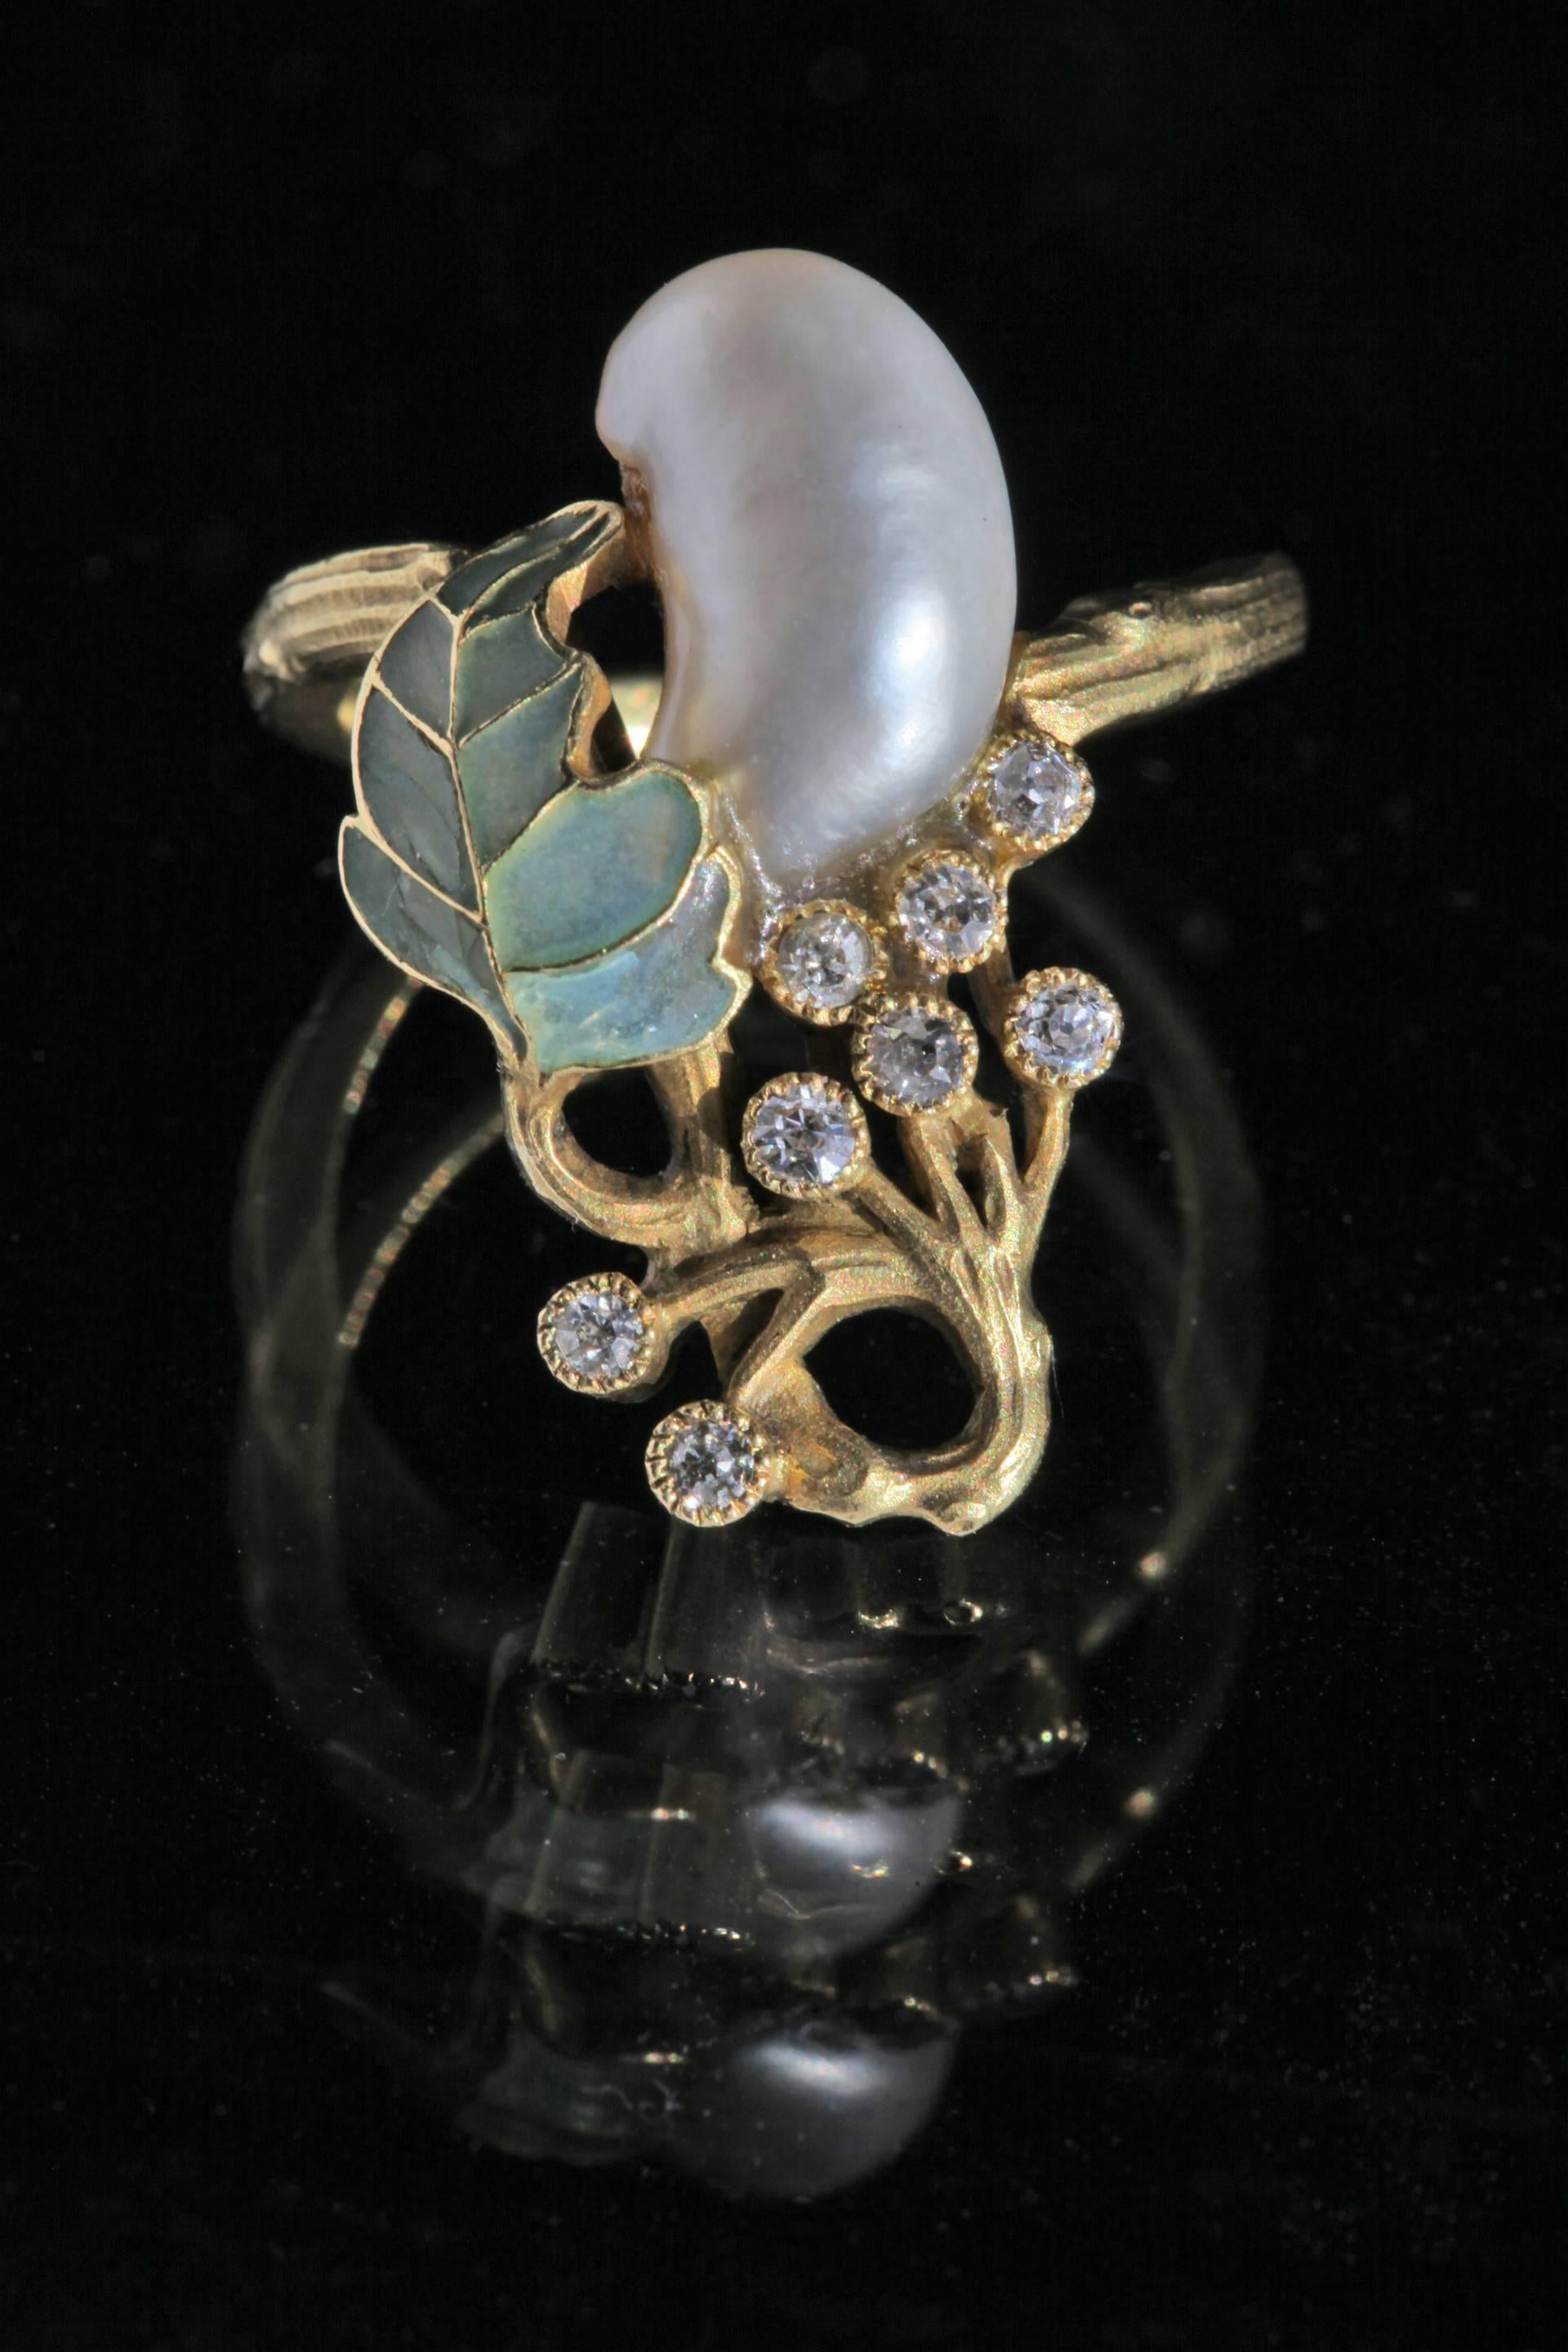 Illustrated in our book:
Beatriz Chadour-Sampson & Sonya Newell-Smith, Tadema Gallery London Jewellery from the 1860s to 1960s, Arnoldsche Art Publishers, Stuttgart 2021, cat. no. 474
Published as a ring by Georges le Turcq by Jean-Jacques Richard